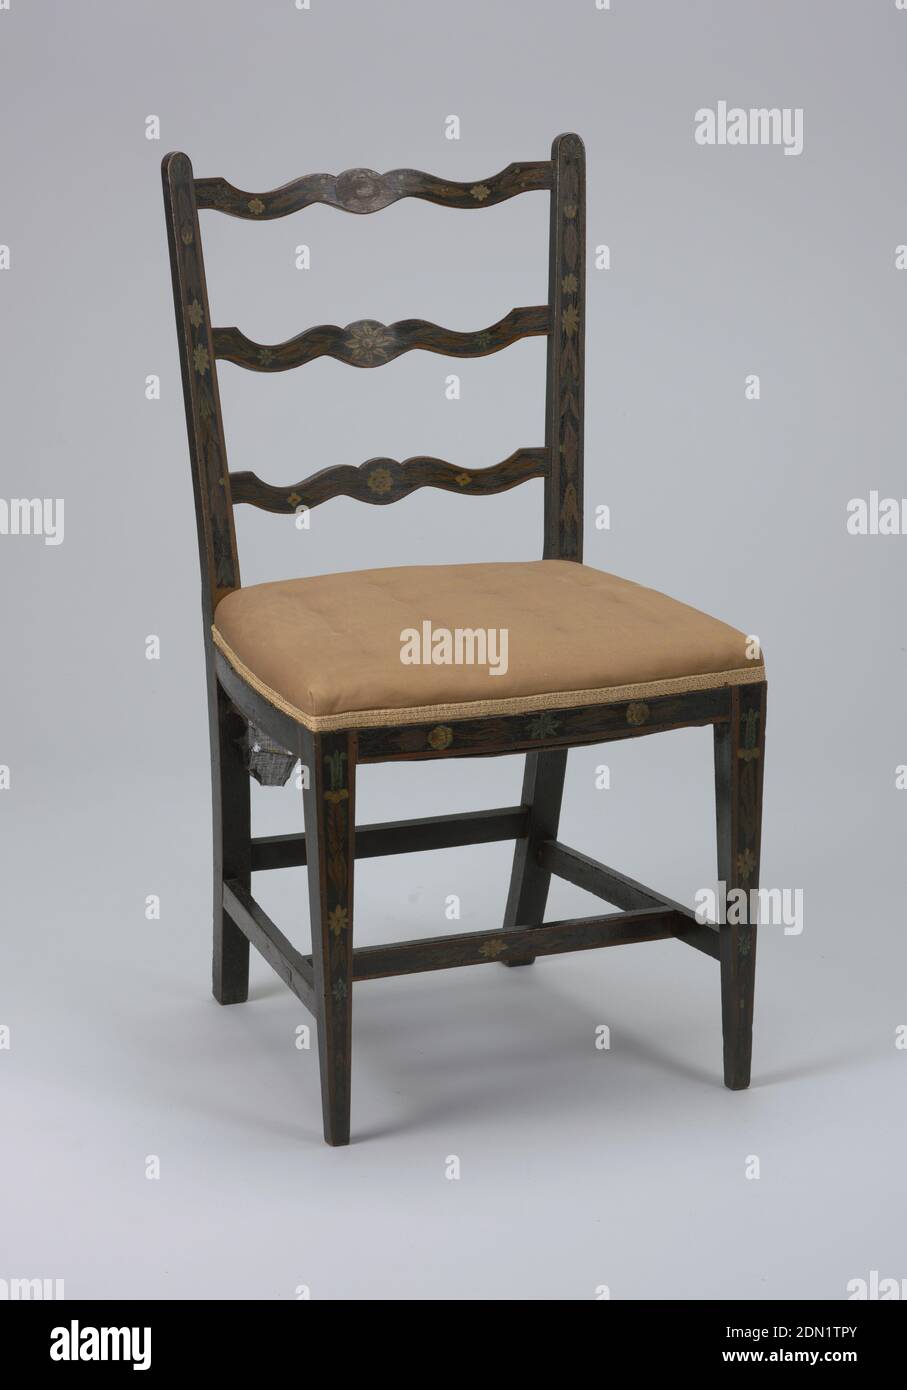 Side chair, wood, painted beech, Three, curvilinear-shaped splats characterize back. Upper posts are tapered. Two lateral and two longitudinal stretchers. Upholstered seat (light pink)., England, ca. 1780, furniture, Decorative Arts, Side chair Stock Photo